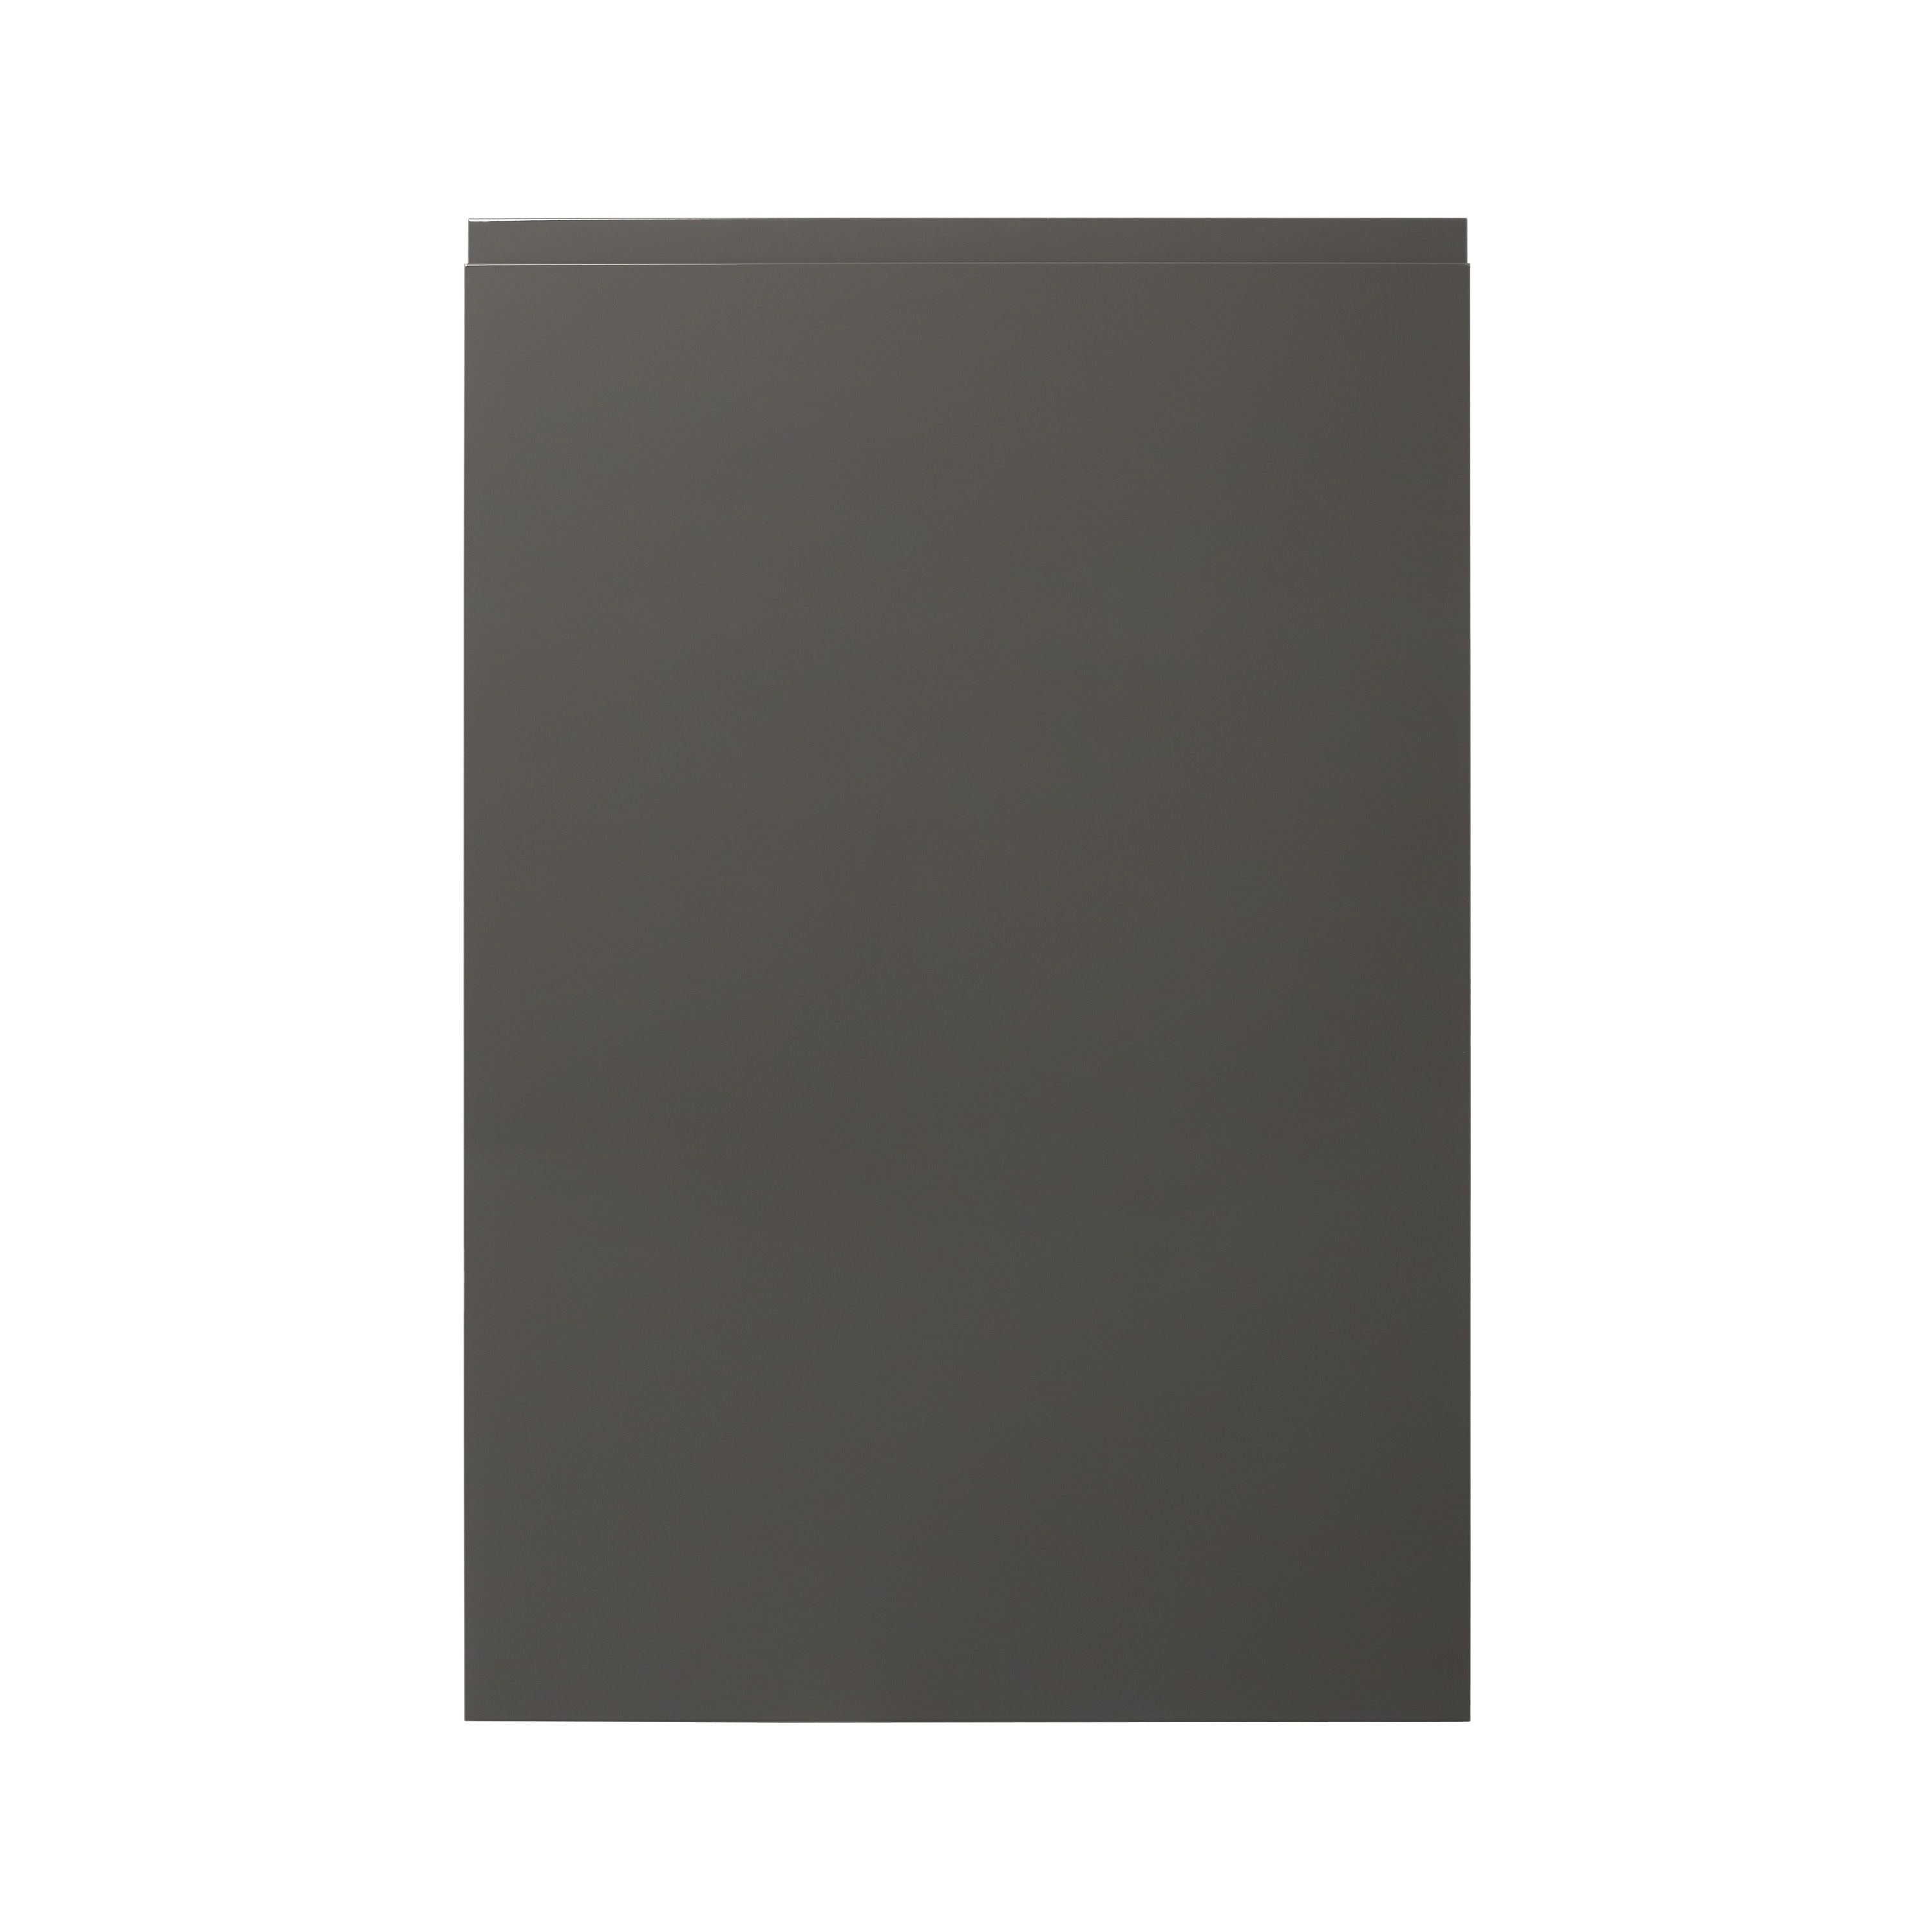 GoodHome Garcinia Gloss anthracite integrated handle Tall wall Cabinet door (W)600mm (H)895mm (T)19mm